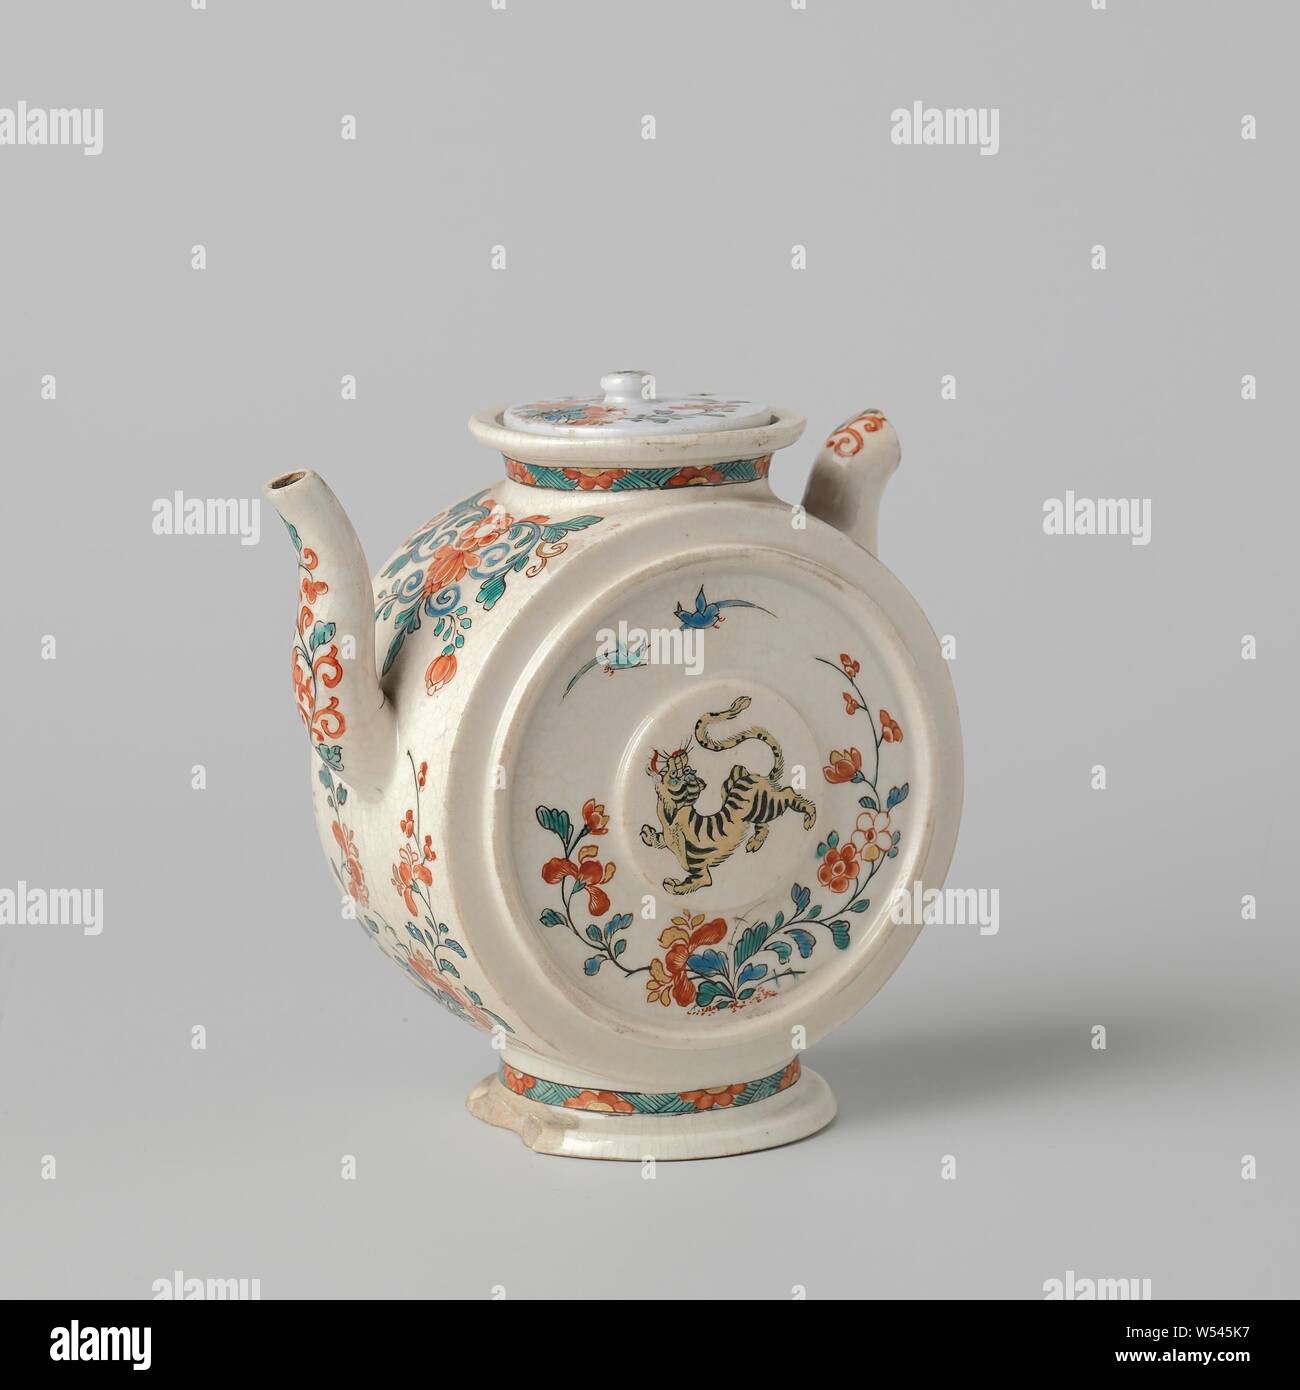 Teapot with a tiger, birds and floral scrolls, Teapot of soft-paste porcelain (pâte tendre) on foot and an S-shaped spout, painted on the glaze in blue, red, green, yellow, black and gold. The belly is in the form of a cylinder standing on the side, with a raised medallion and a raised circle on the flat wall. On the wall a tiger, two birds and a flowering plant. The round wall, the spout and the ear with flower vines. On the neck and foot a band with hatching interrupted by half flowers. The ear has largely broken off. Kakiemon style., anonymous, Japan, c. 1700 - c. 1799, Edo-period (1600 Stock Photo